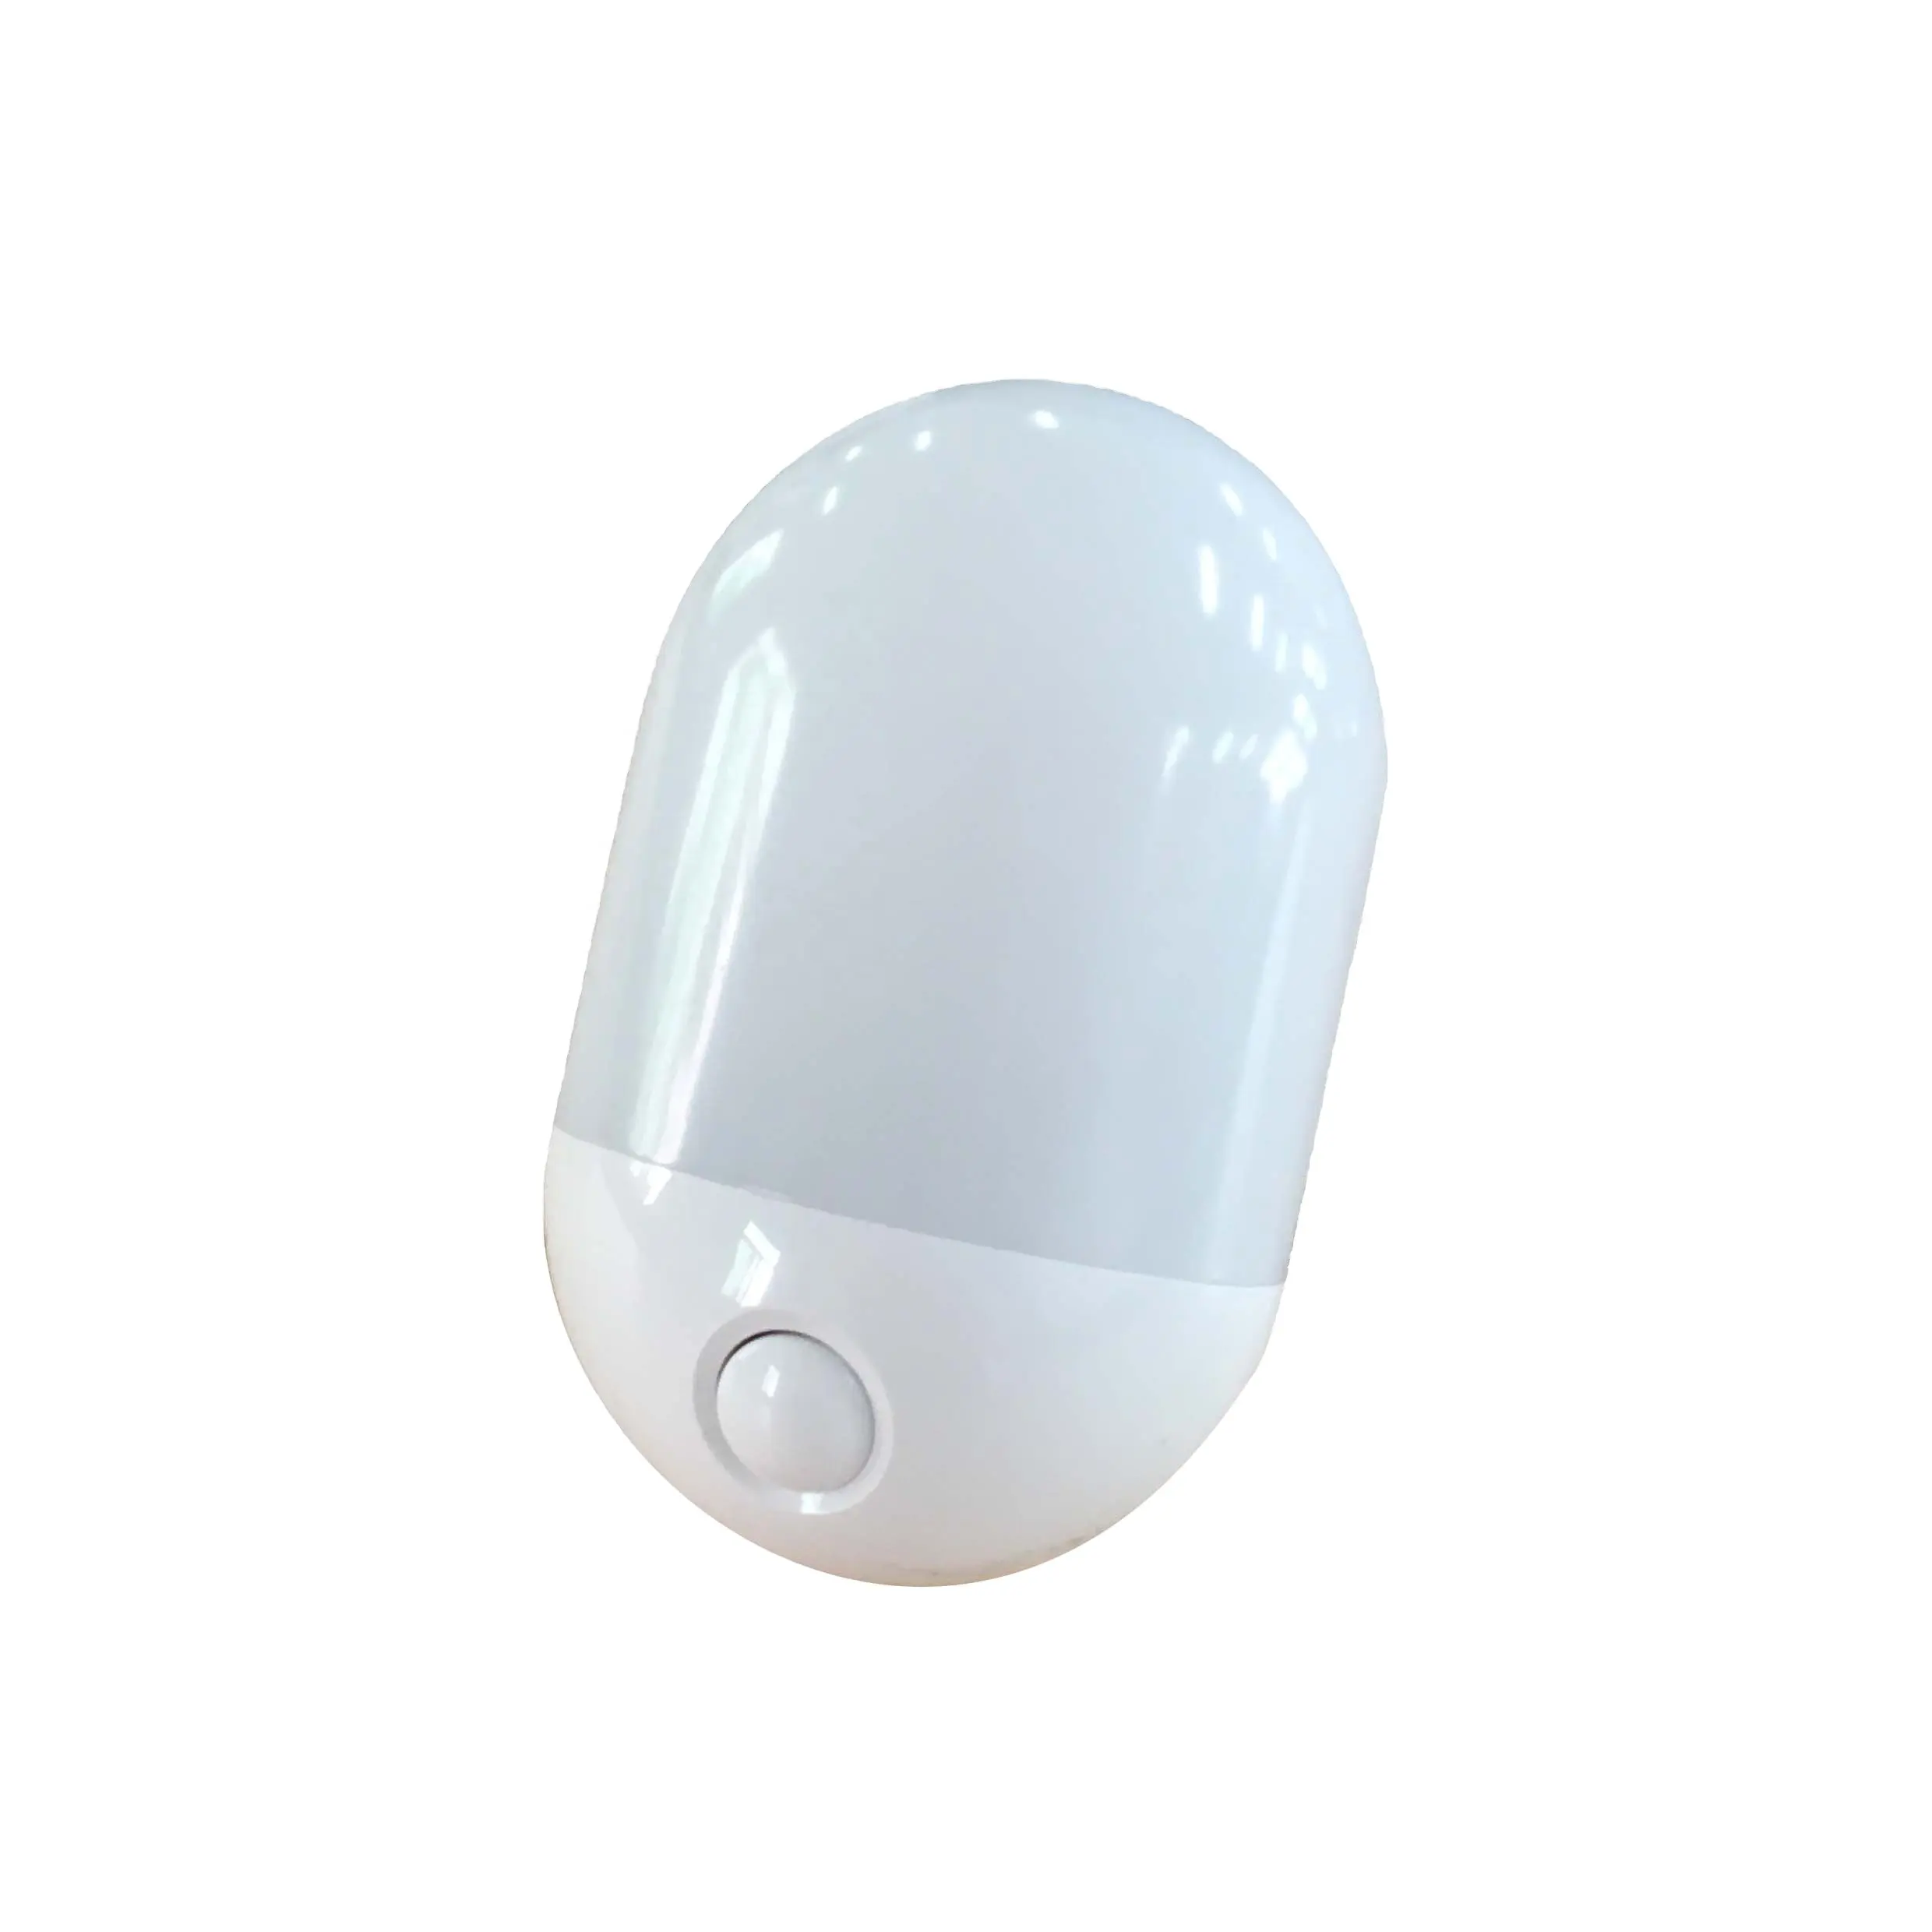 Bedroom Use LED Night Light Oval Shaped Push On/Off To Control